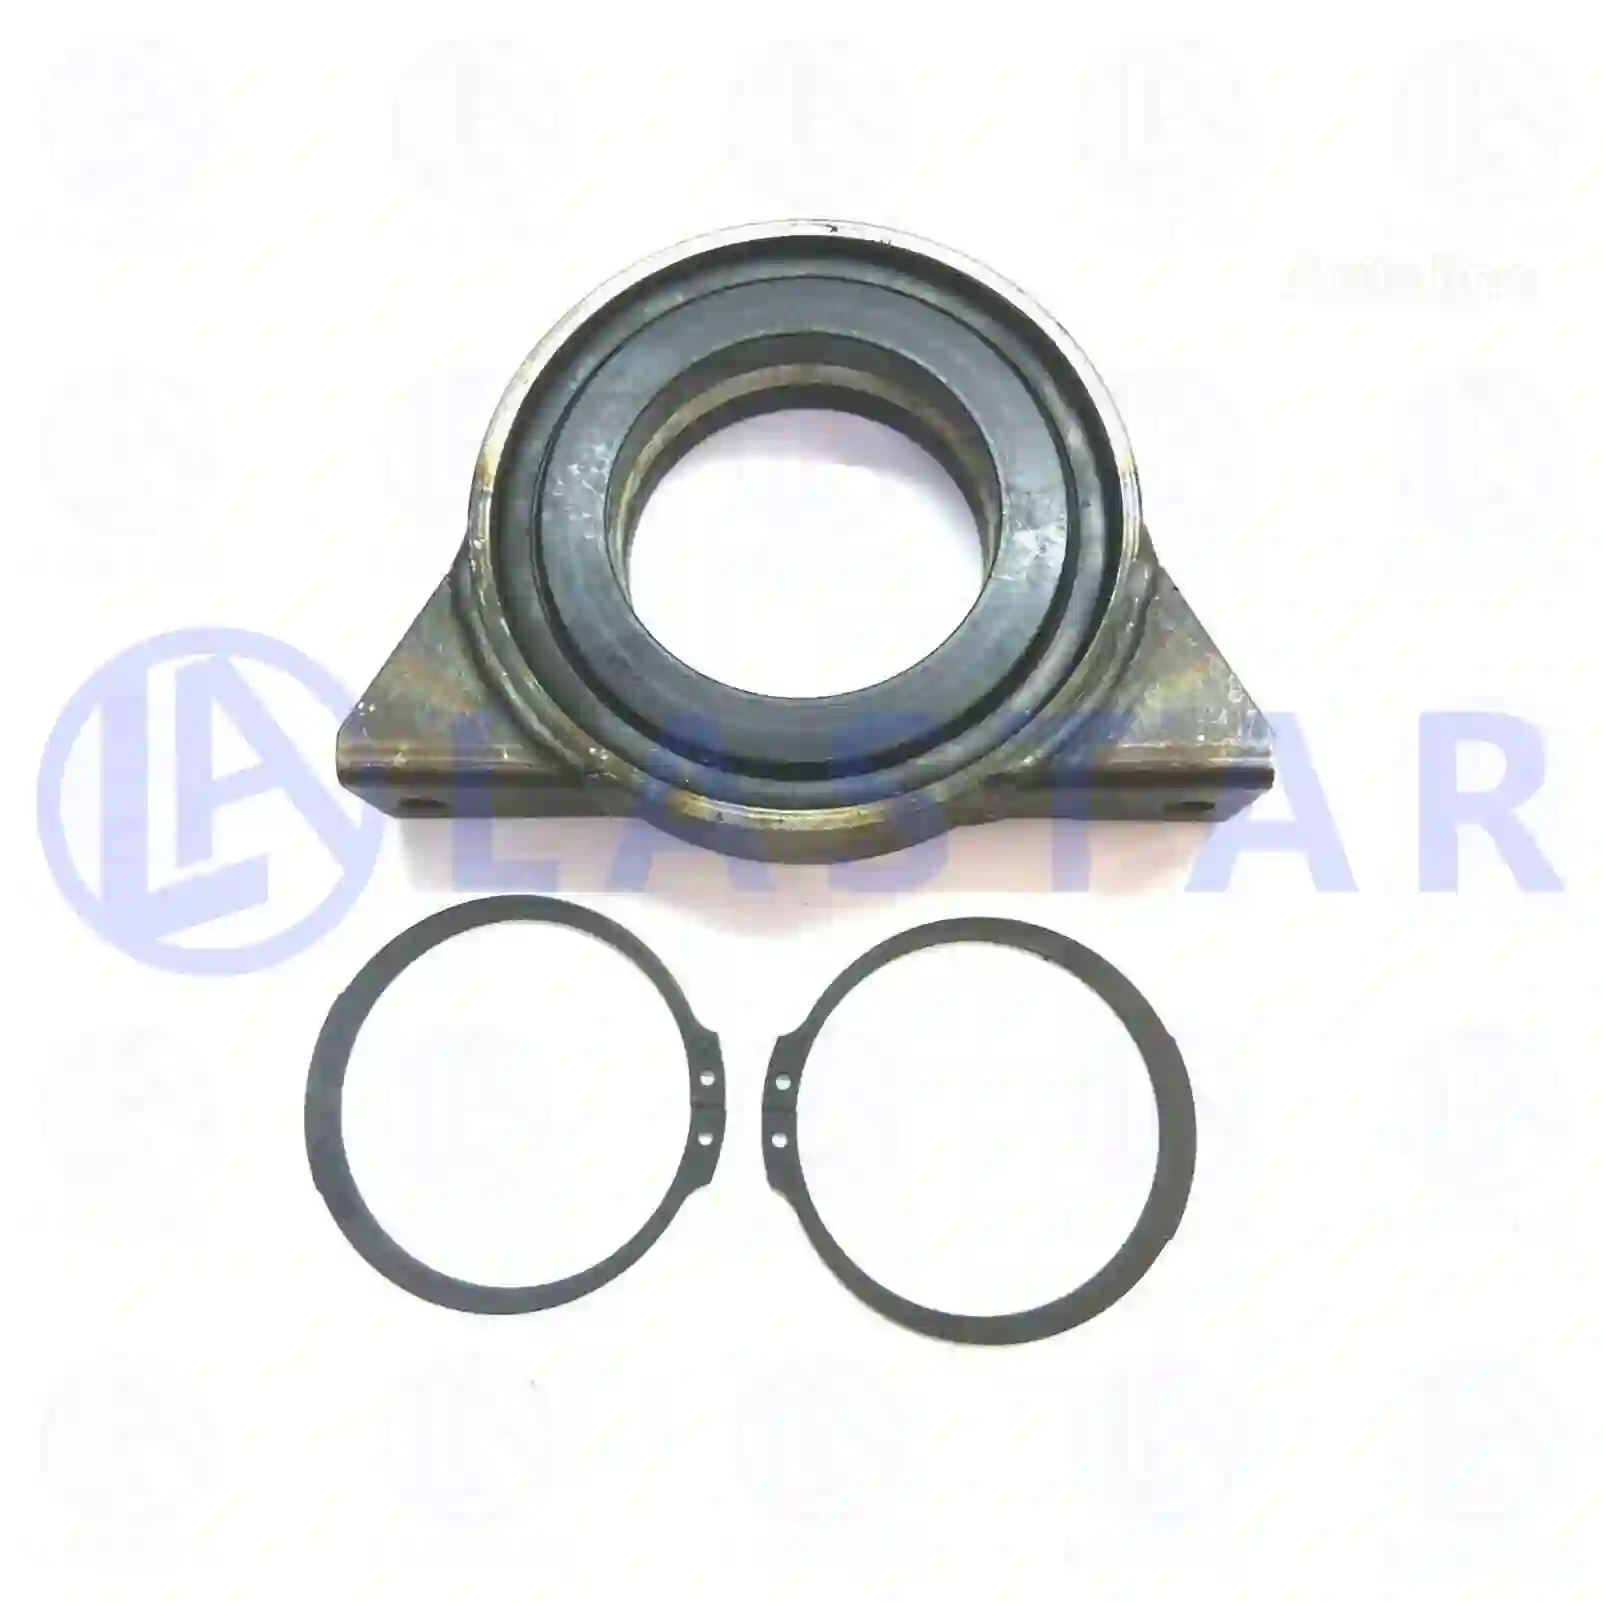 Support Bearing Center bearing, la no: 77734418 ,  oem no:93192009, 81394106016, 81394106018, 81394106025, ZG02479-0008 Lastar Spare Part | Truck Spare Parts, Auotomotive Spare Parts